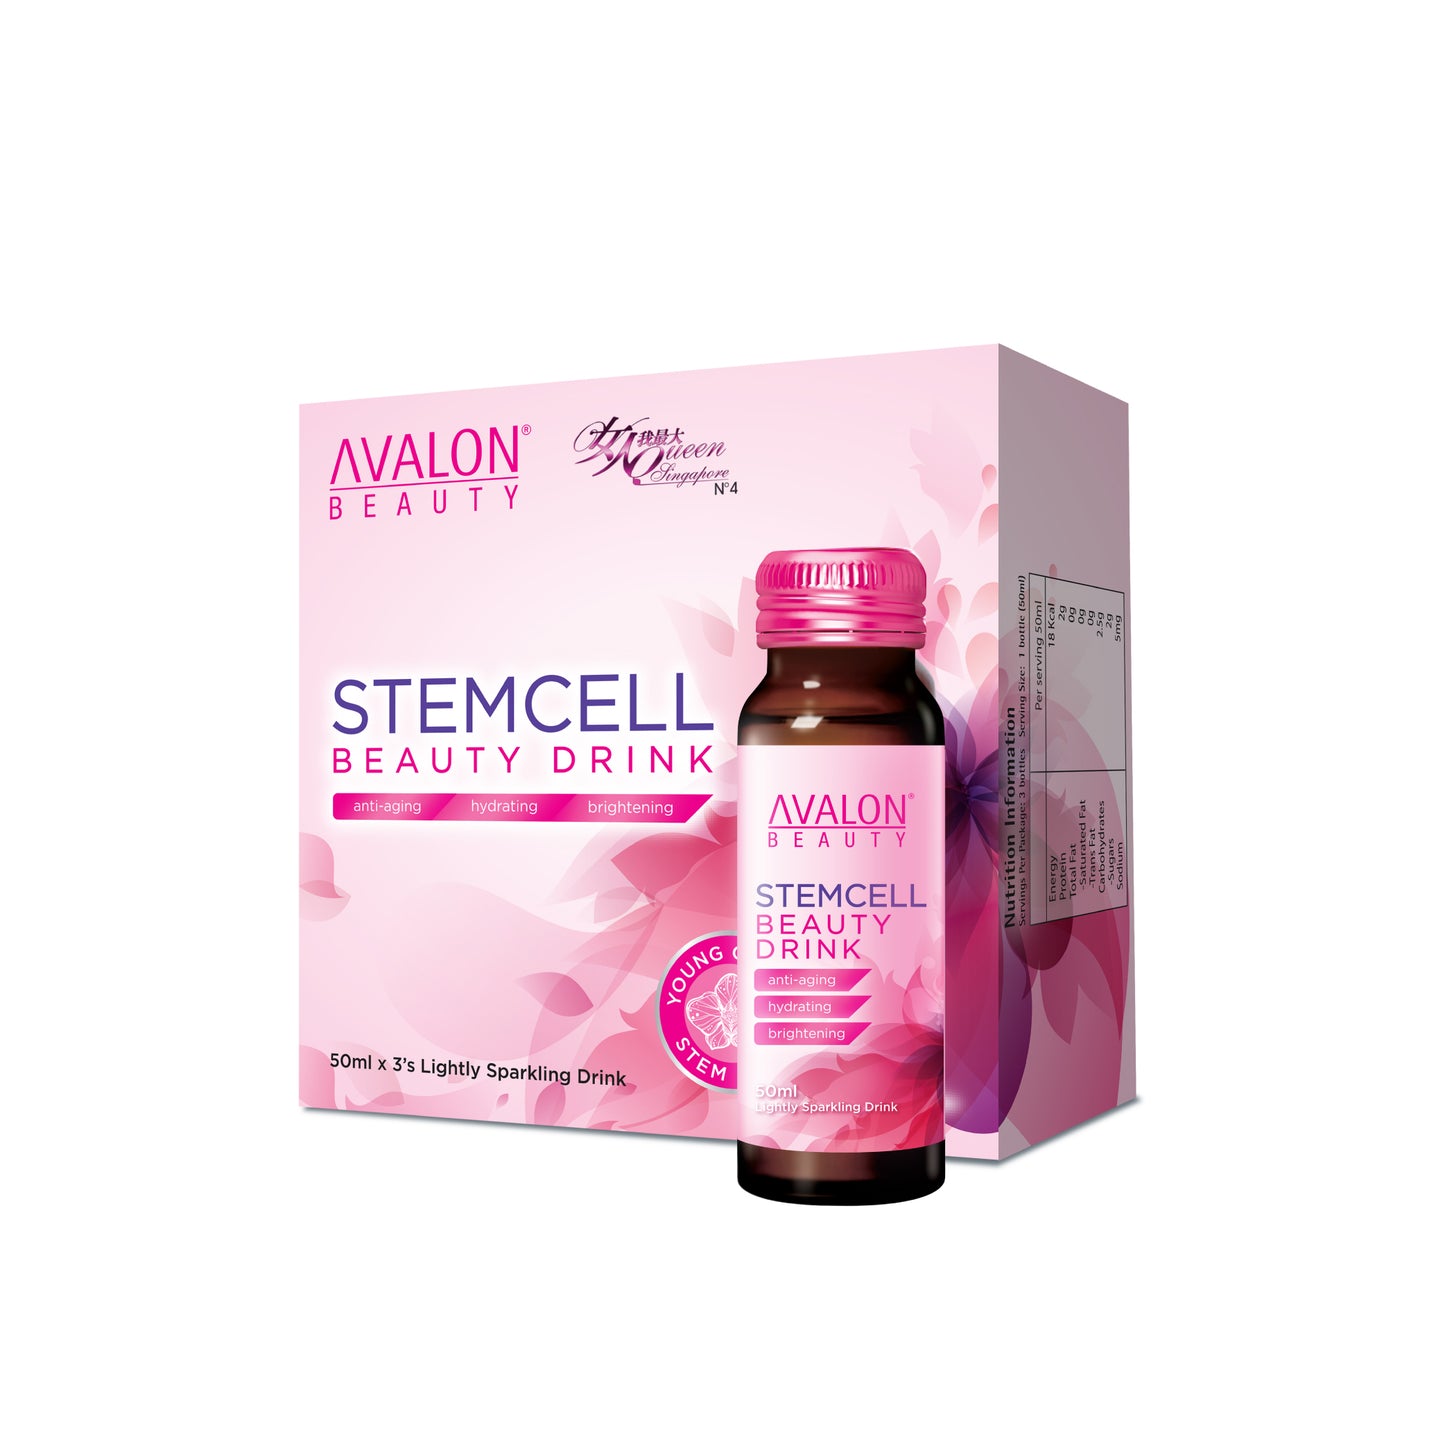 AVALON® Stemcell Beauty Drink Trial Size